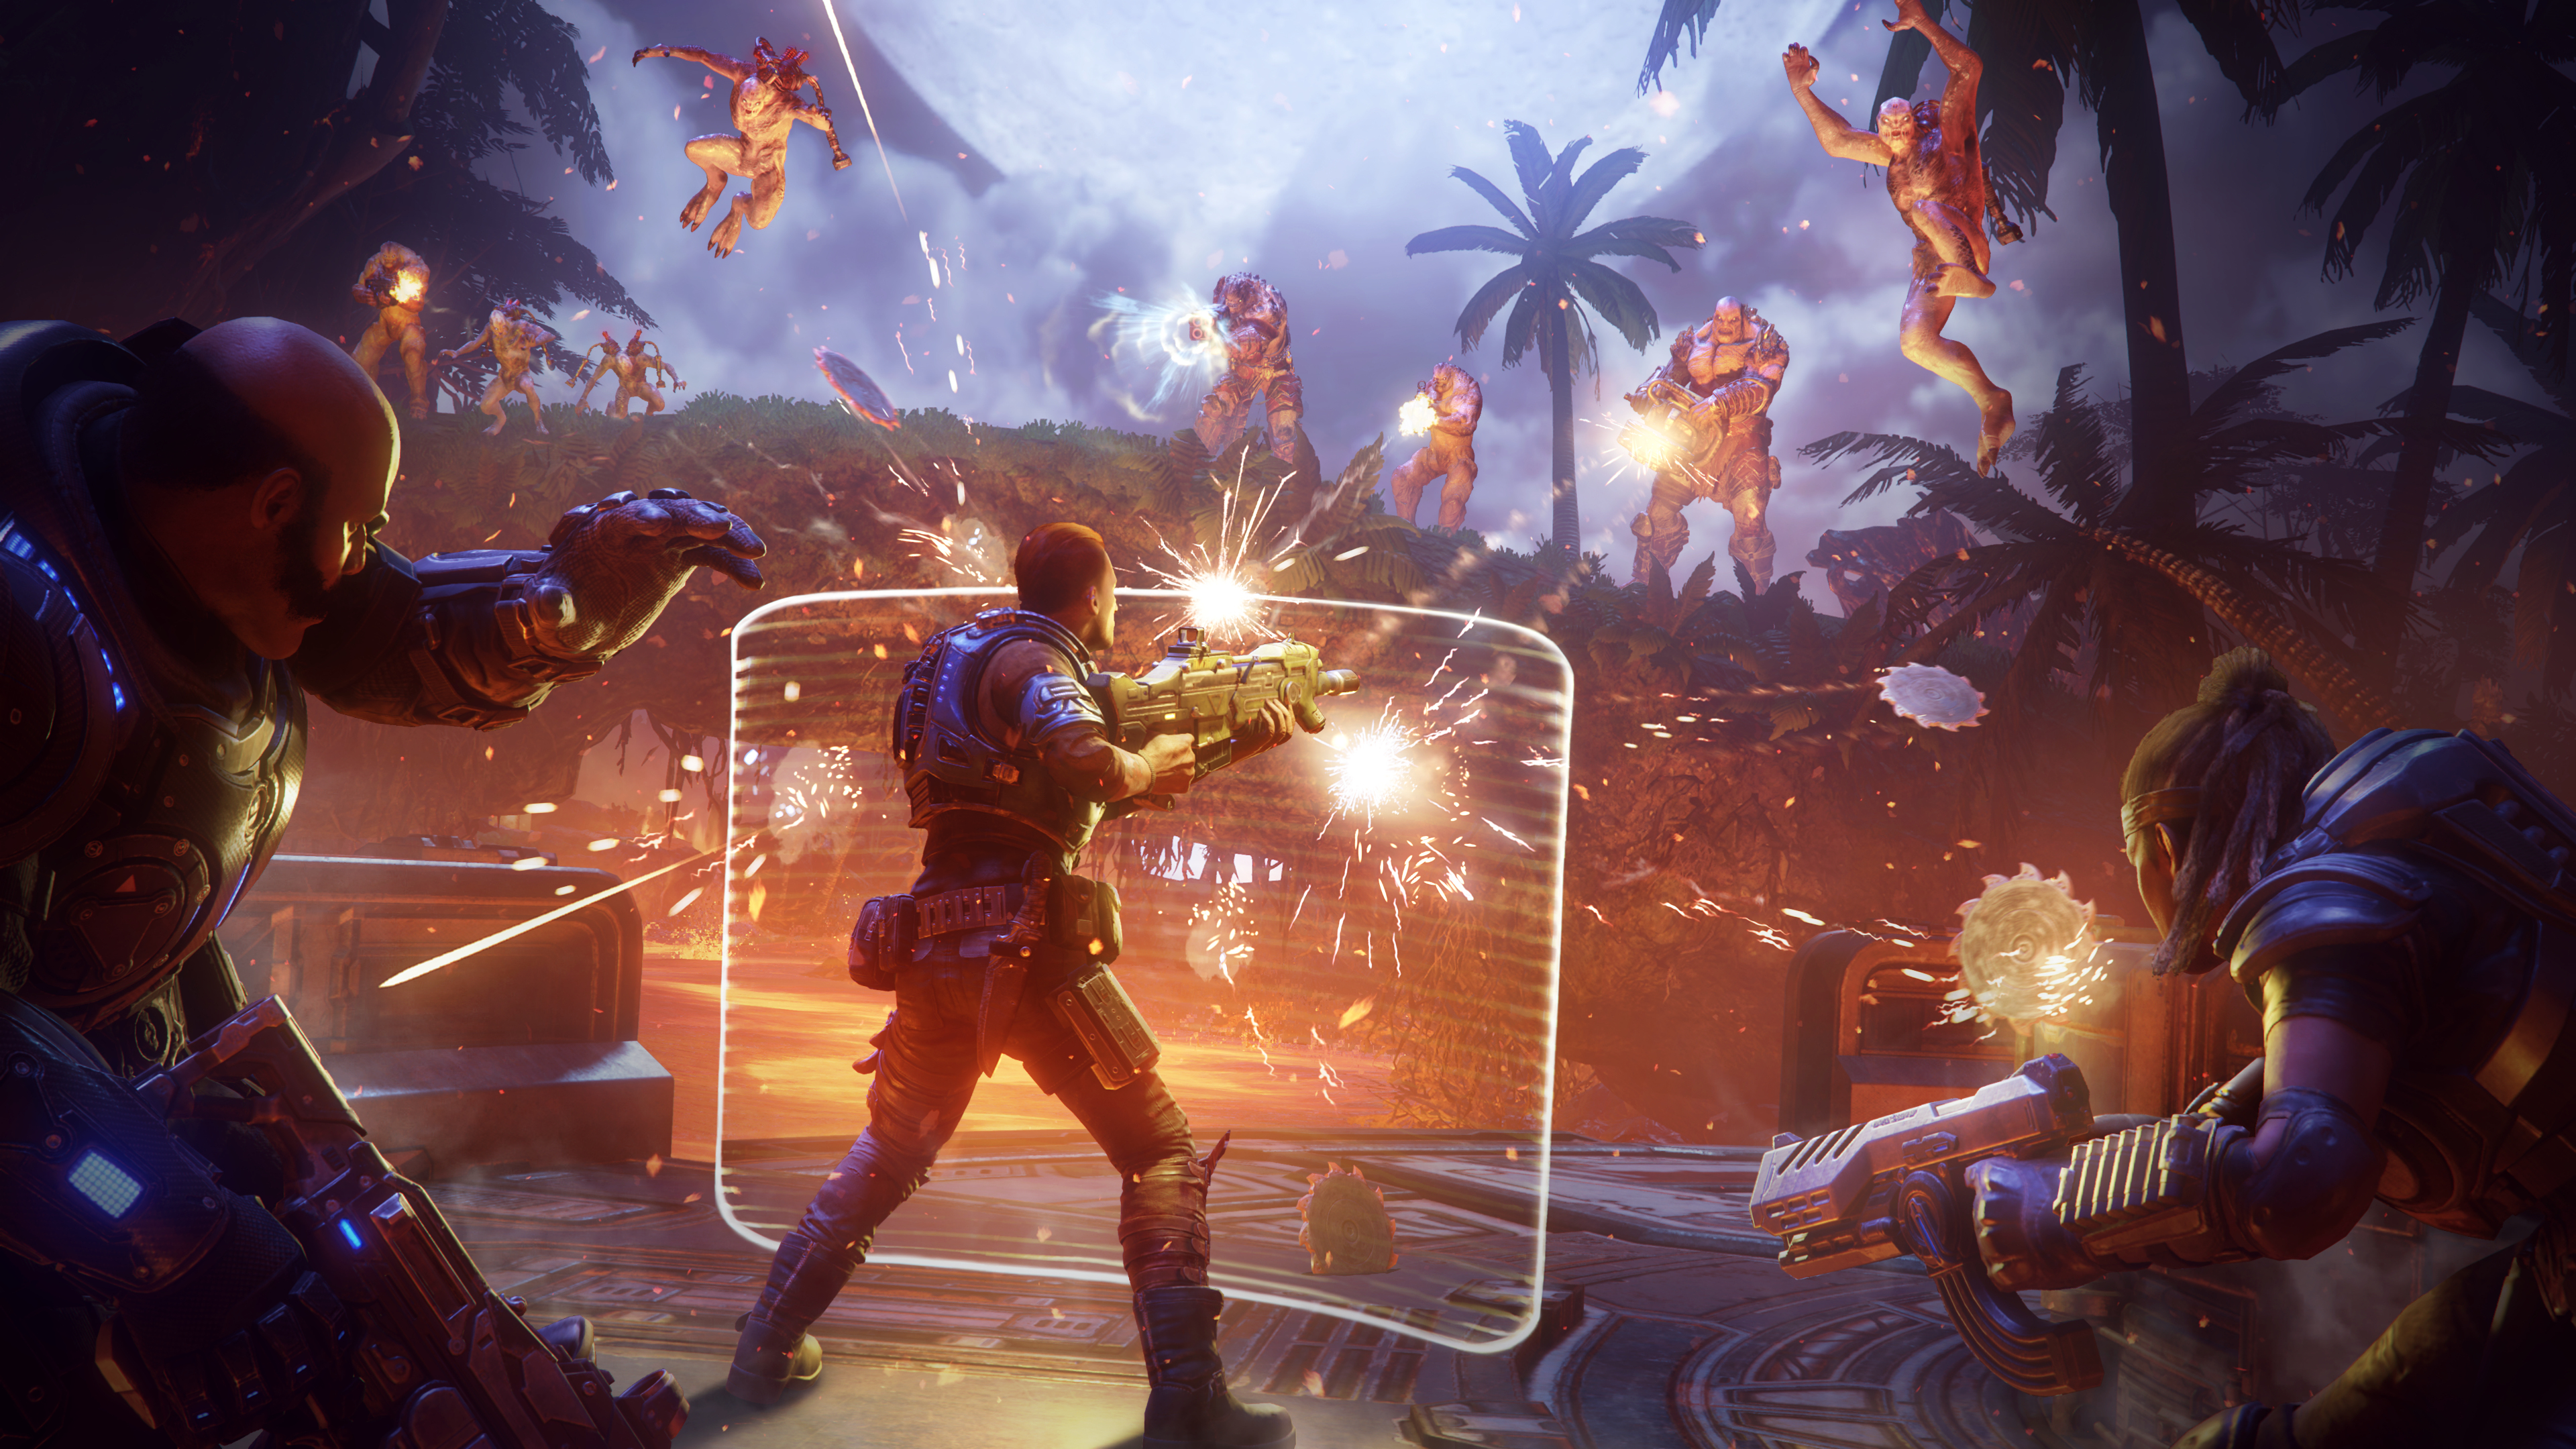 Gears 5 Hivebusters on Xbox and PC: Everything you need to know about this  story DLC